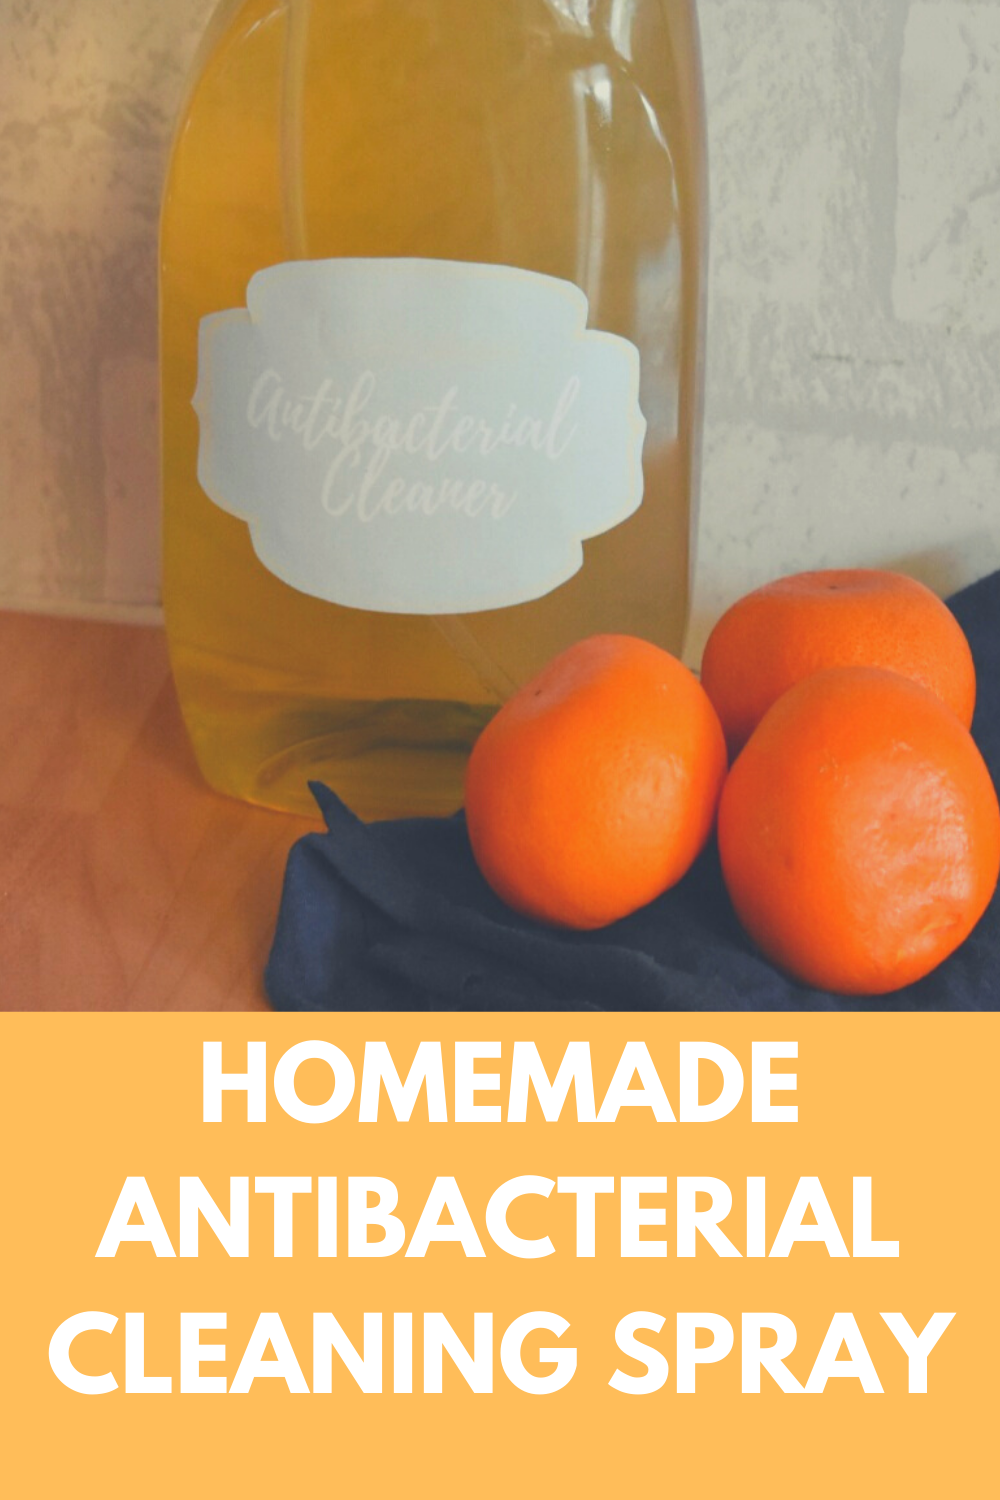 Homemade Antibacterial Cleaning Spray - Make your own cleaning products